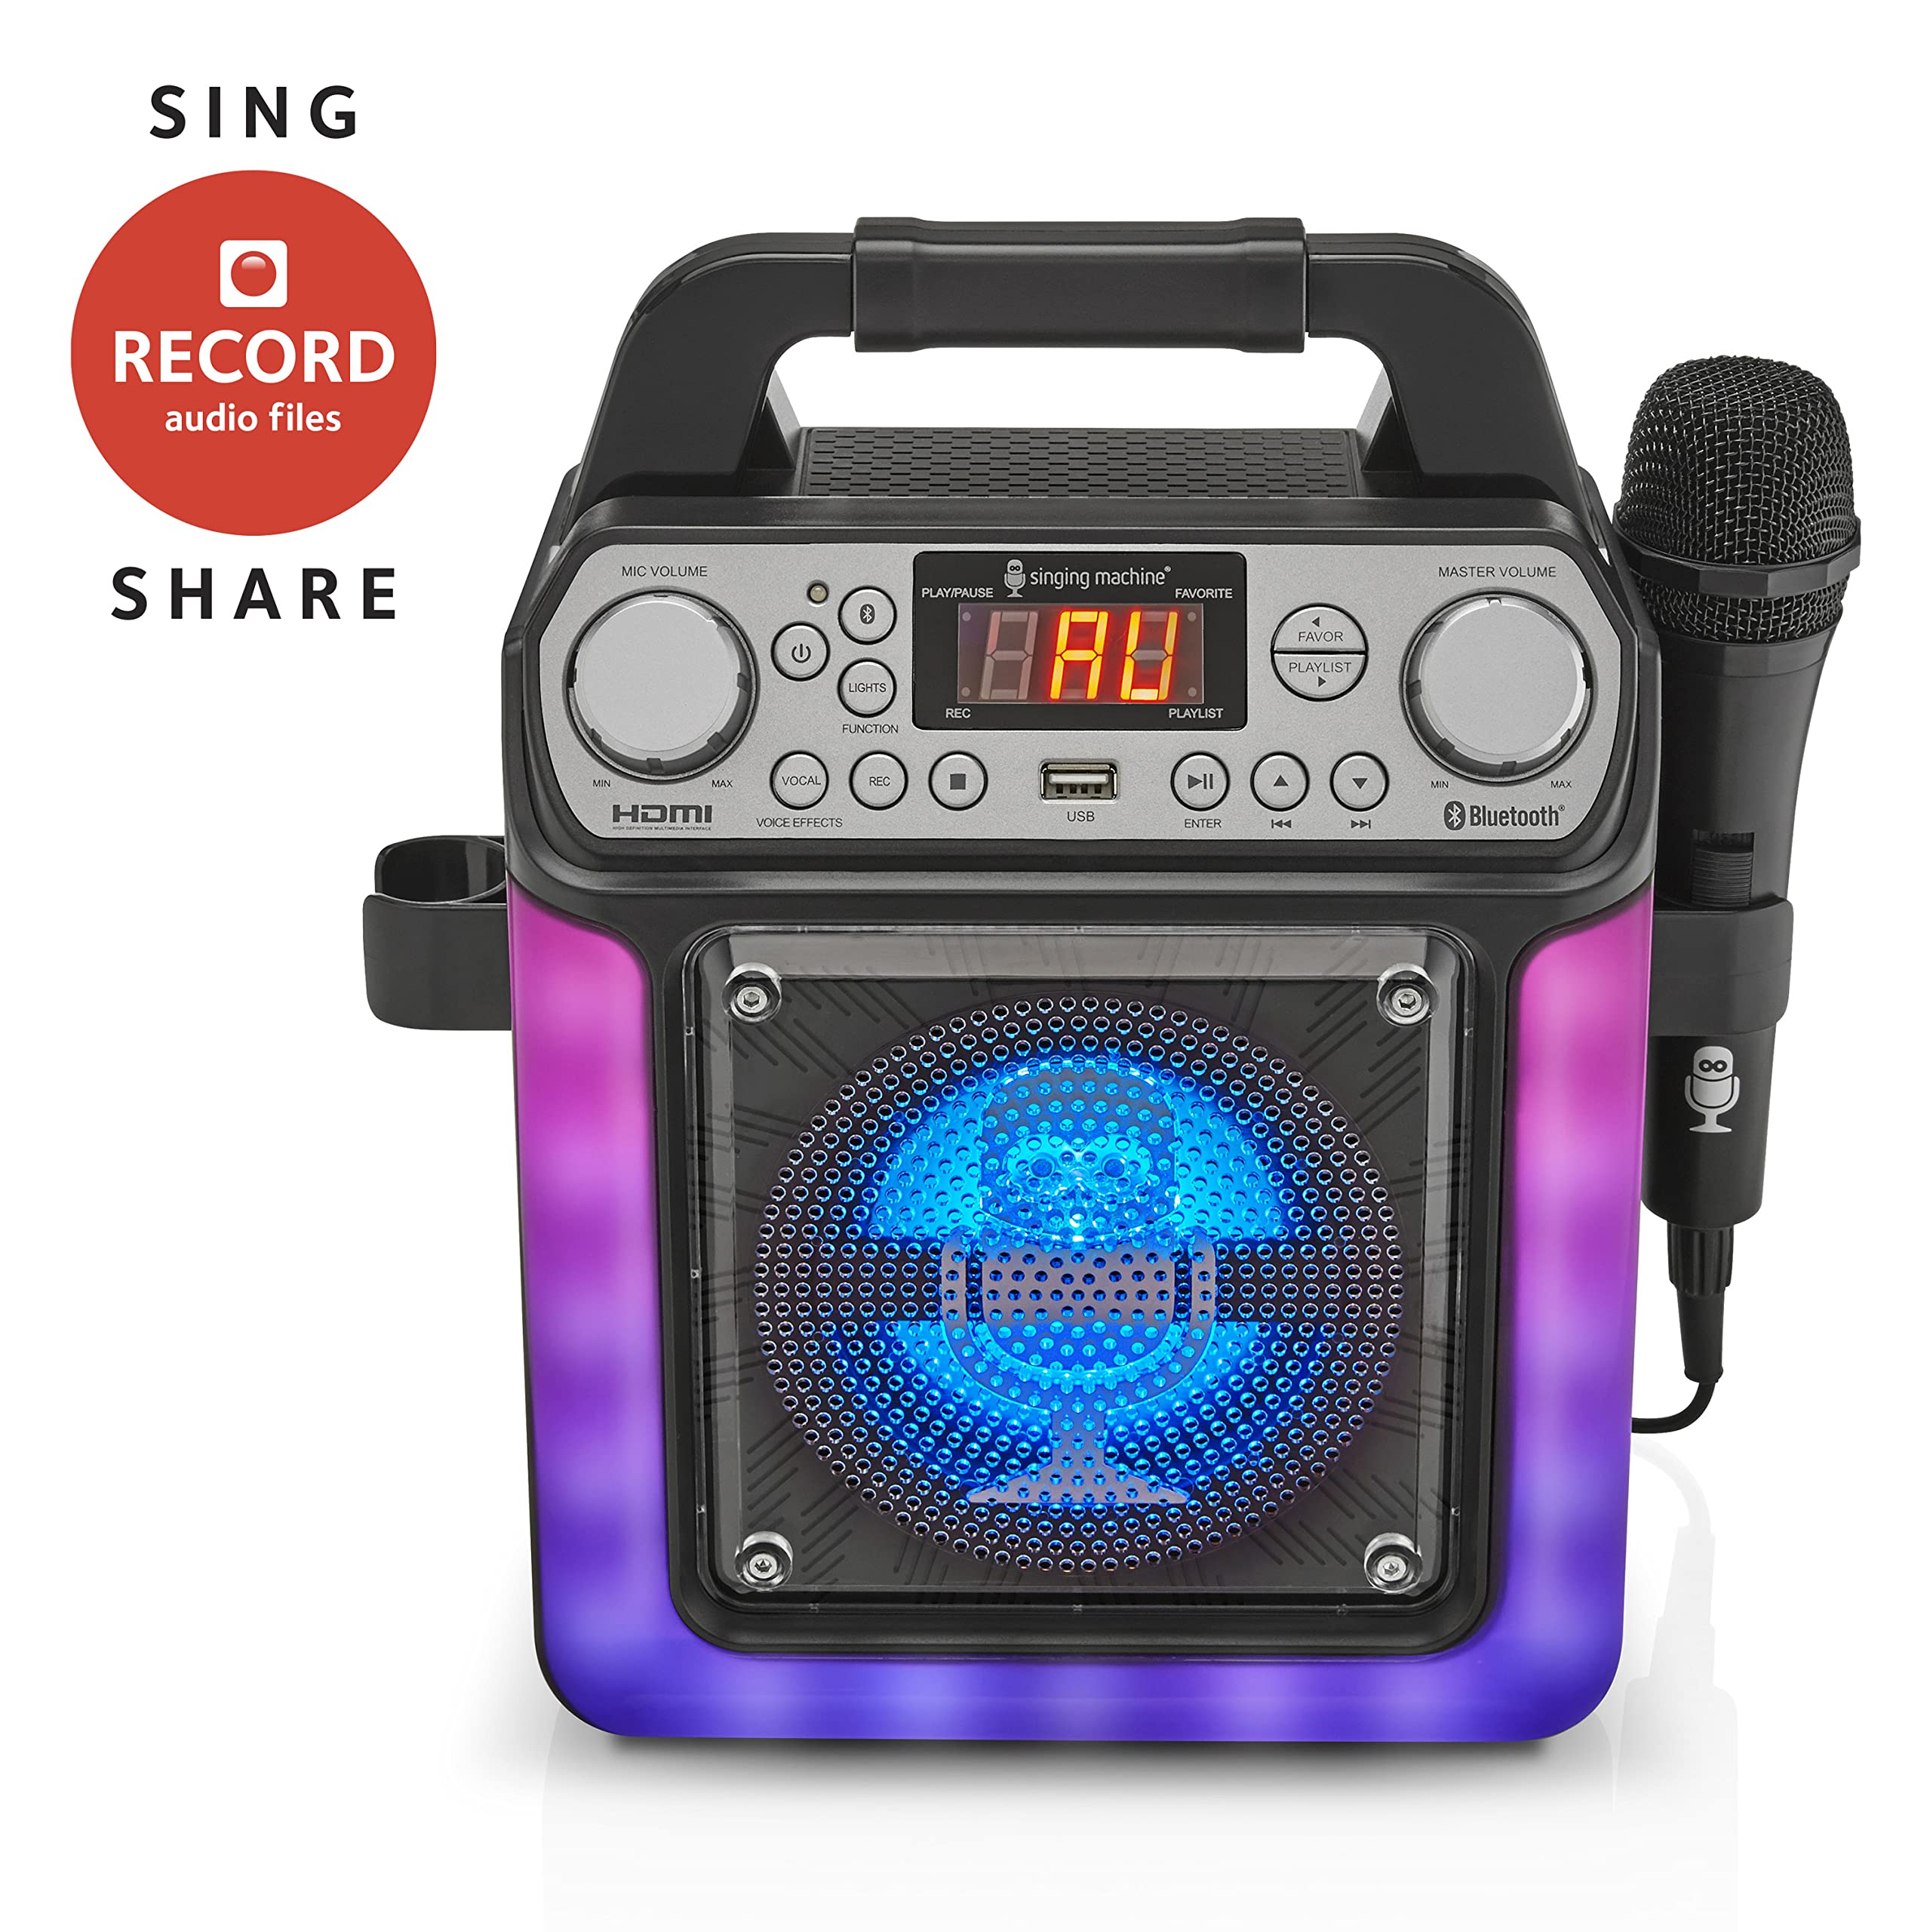 Singing Machine Portable Karaoke Machine for Adults & Kids with Wired Microphone, Groove Mini (Black) - Built-In Karaoke Speaker, Bluetooth with LED Lights - Karaoke System with Voice Changing Effects